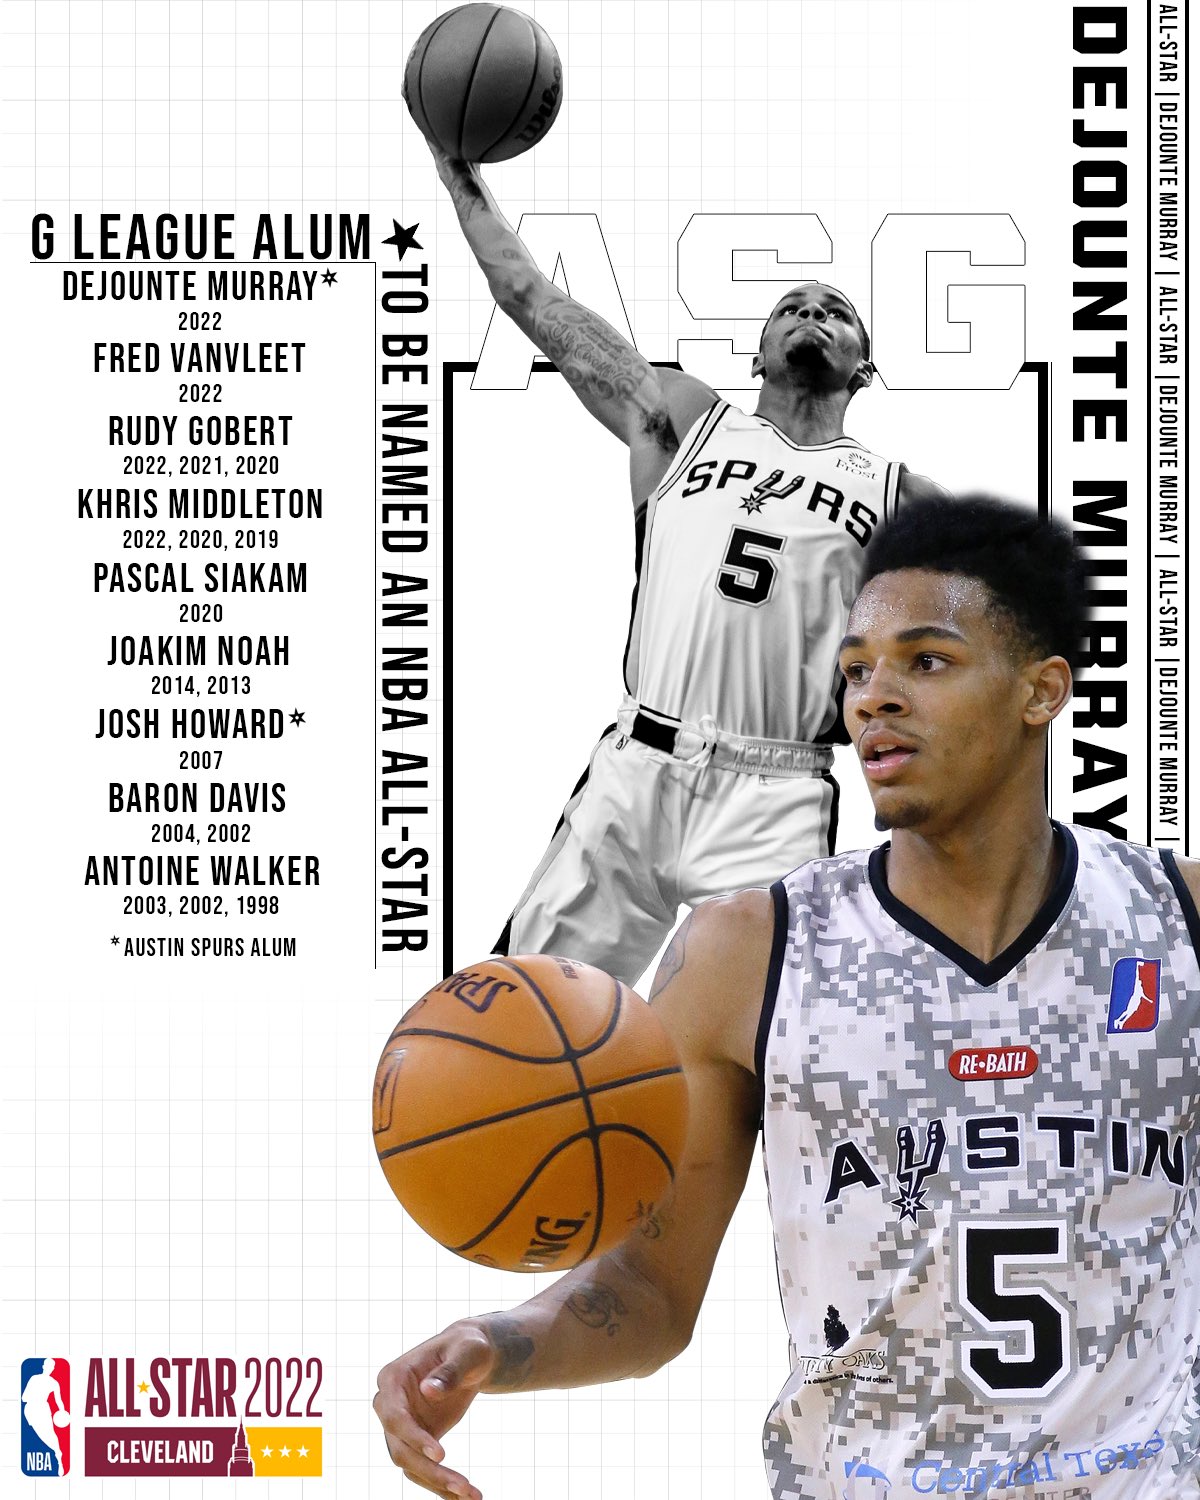 Back in the 2016-17 season, ROOKIE Dejounte Murray starred in the G League  for the @austinspurs! The to-be NBA All-Star averaged 17.2 PPG…